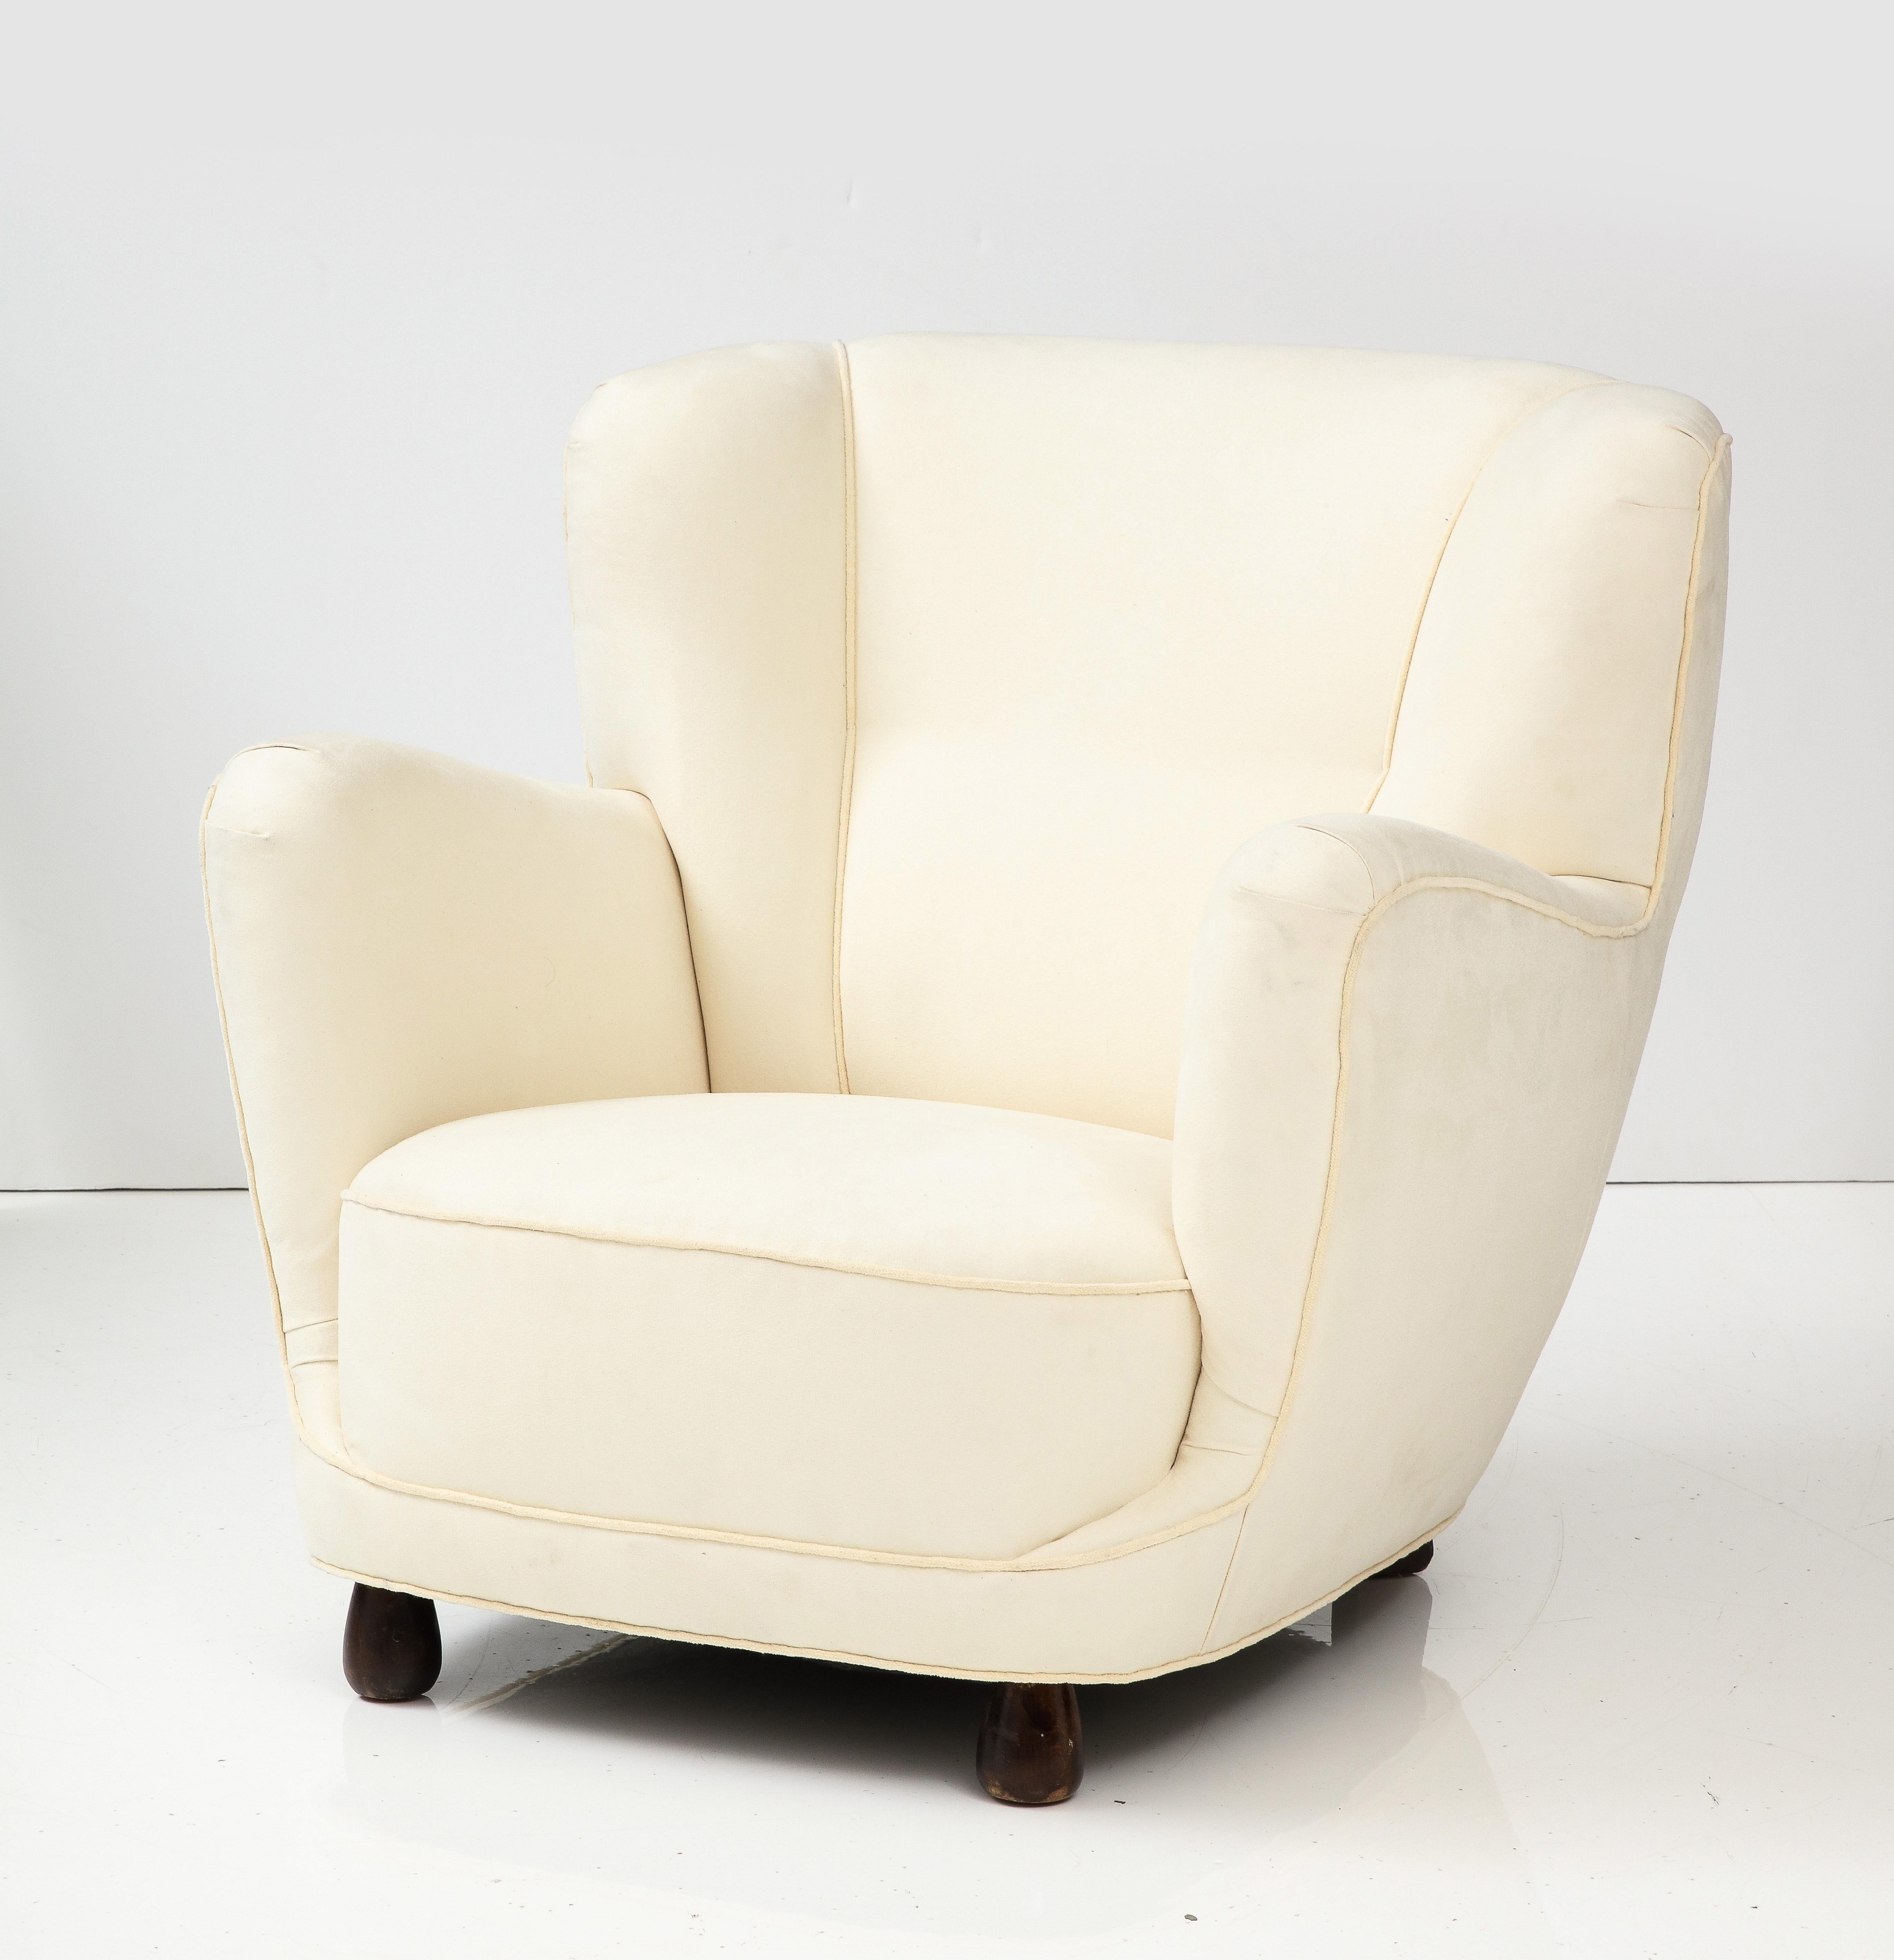 Danish Upholstered Club Chair in Muslin, 1940's In Good Condition For Sale In Brooklyn, NY